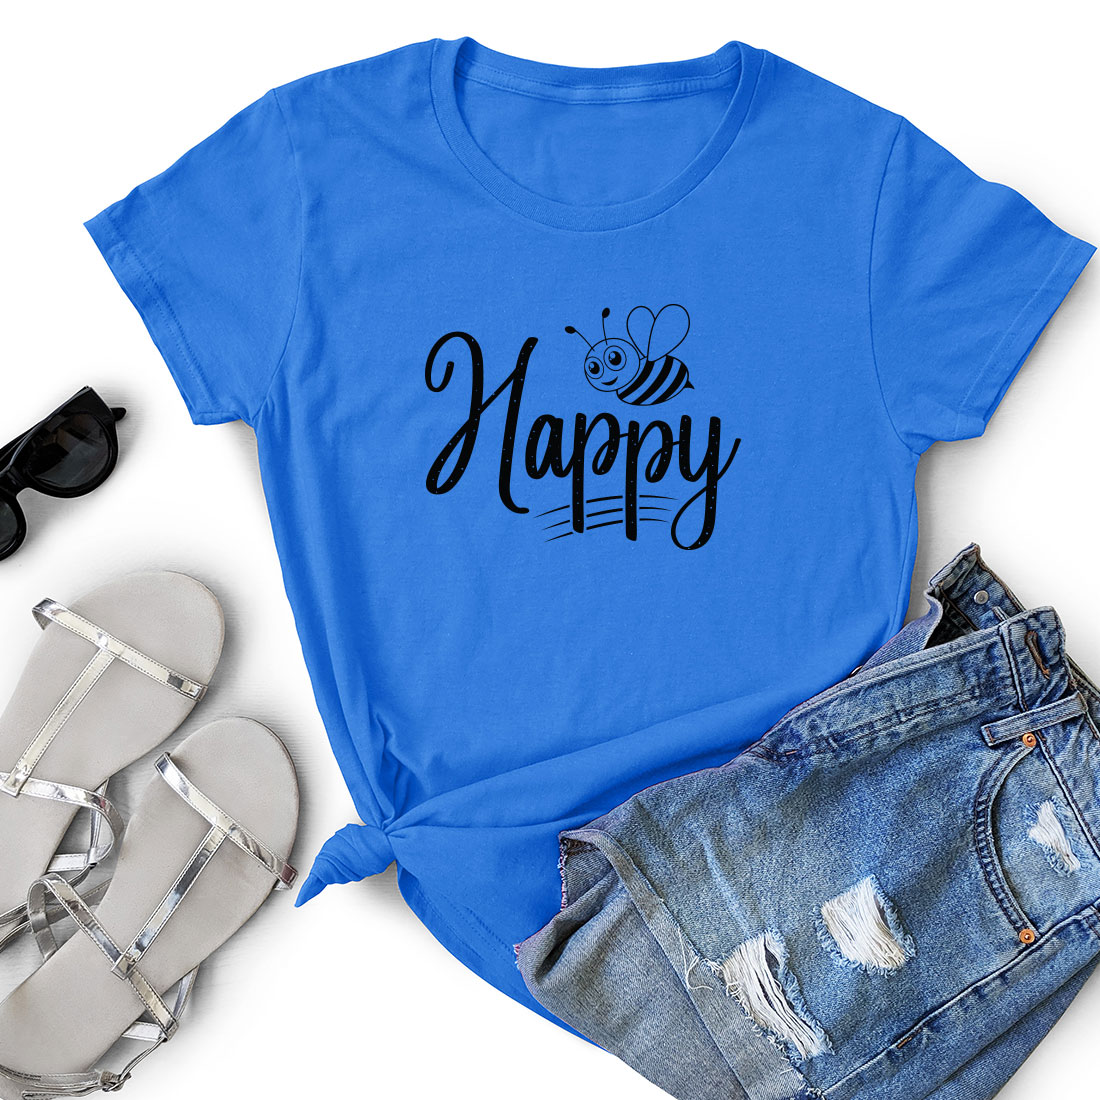 T - shirt that says happy with a bee on it.